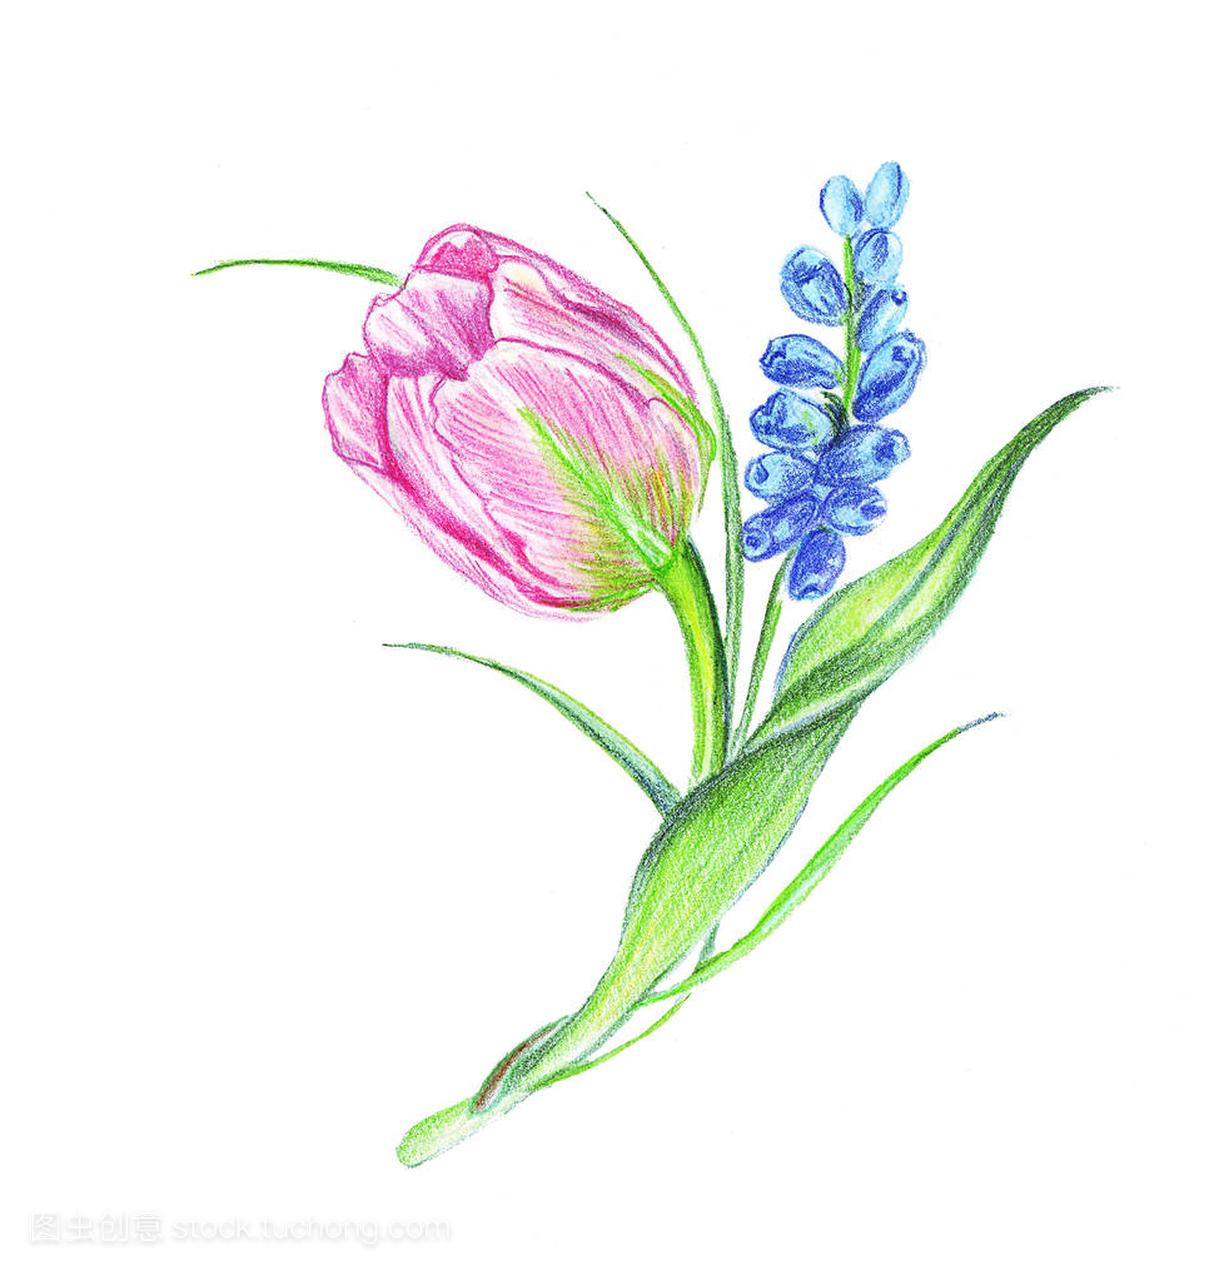 Illustration of colored bunches of flowers in the c